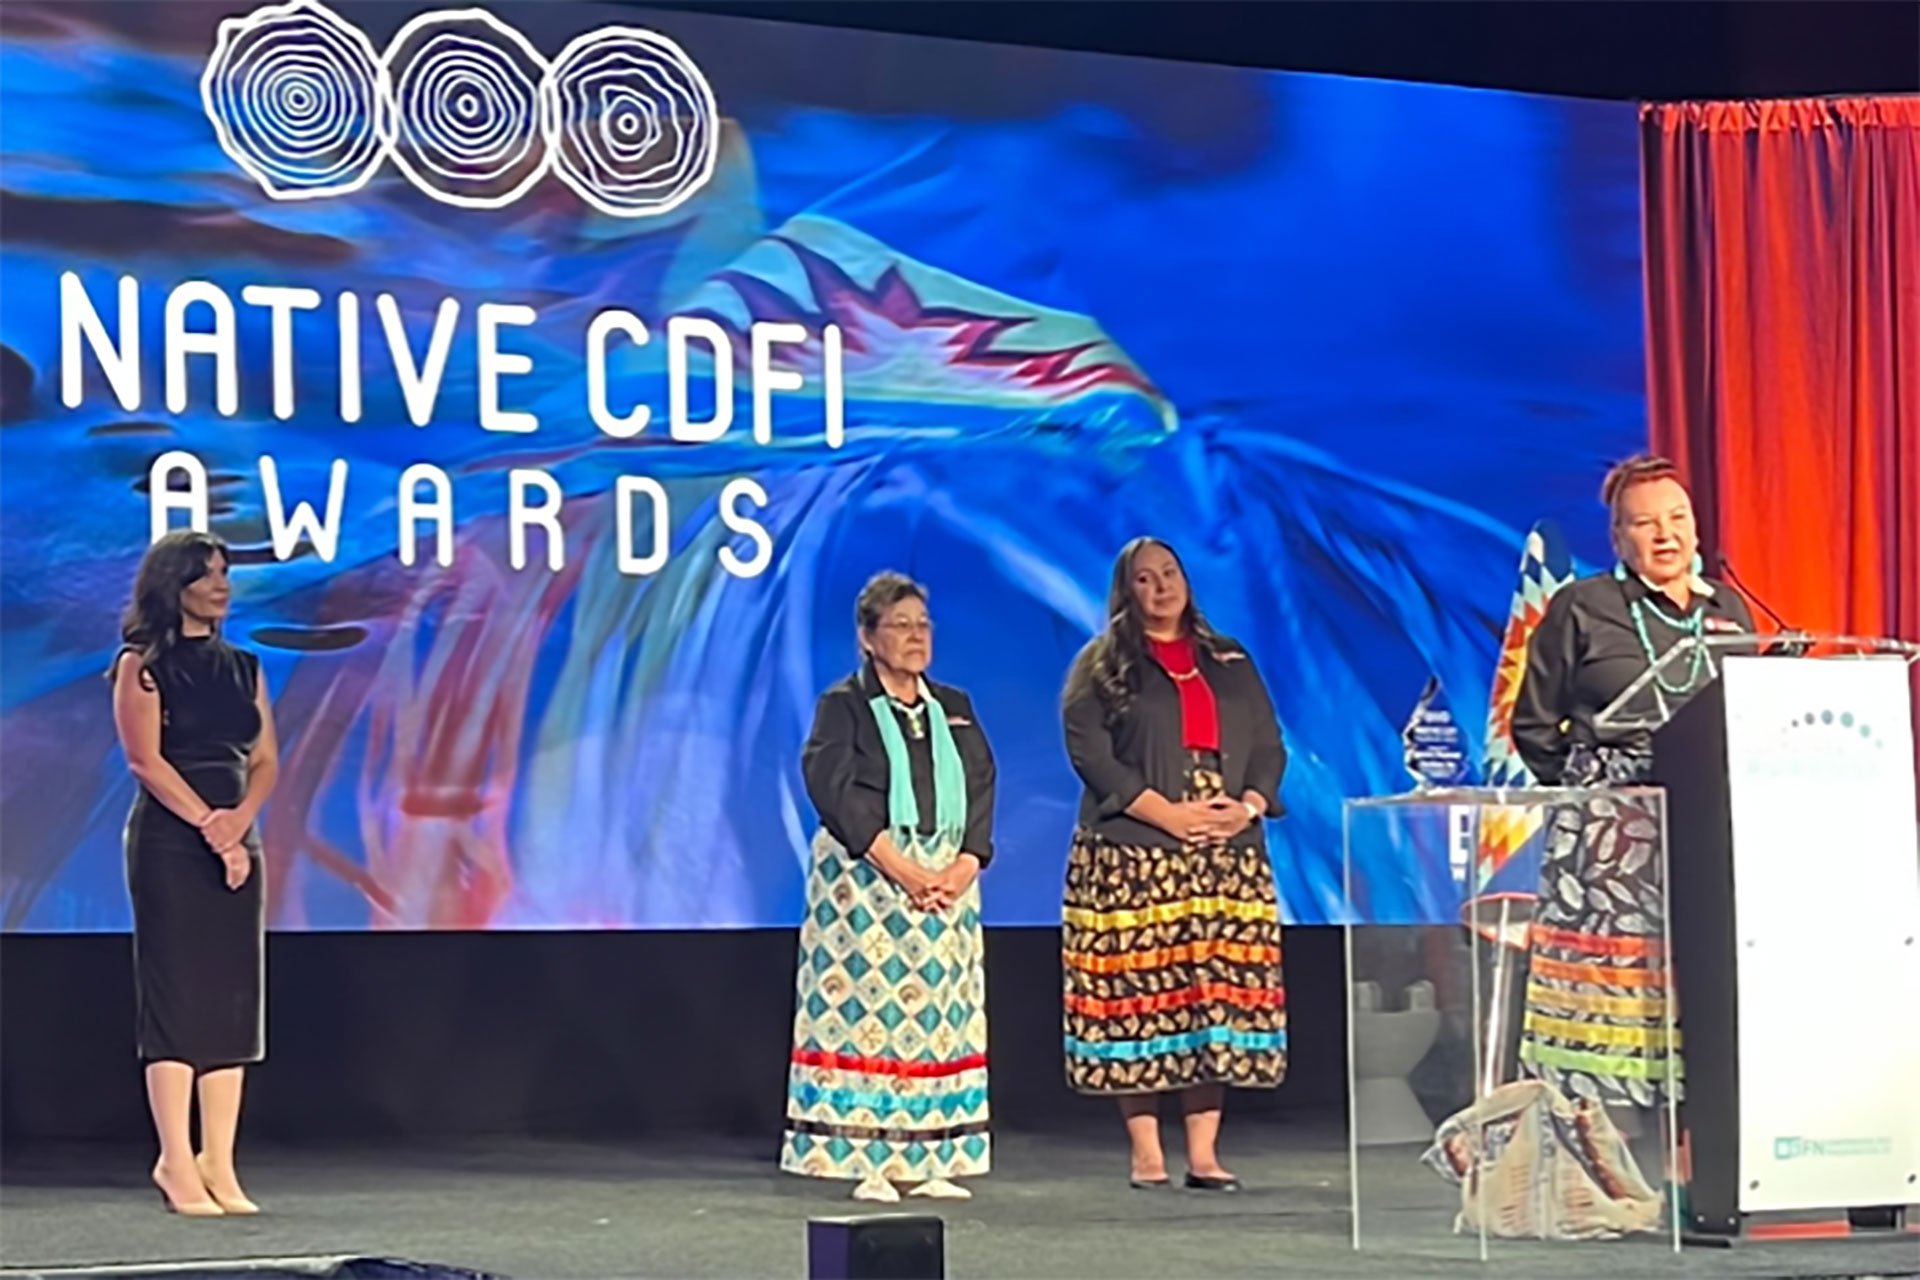 NACDC Financial Services one of two awardees at the national Native CDFI Awards banquet in Washington, D.C.. Left to right is Patty Gobert, Leona Antoine, and Angie Main.